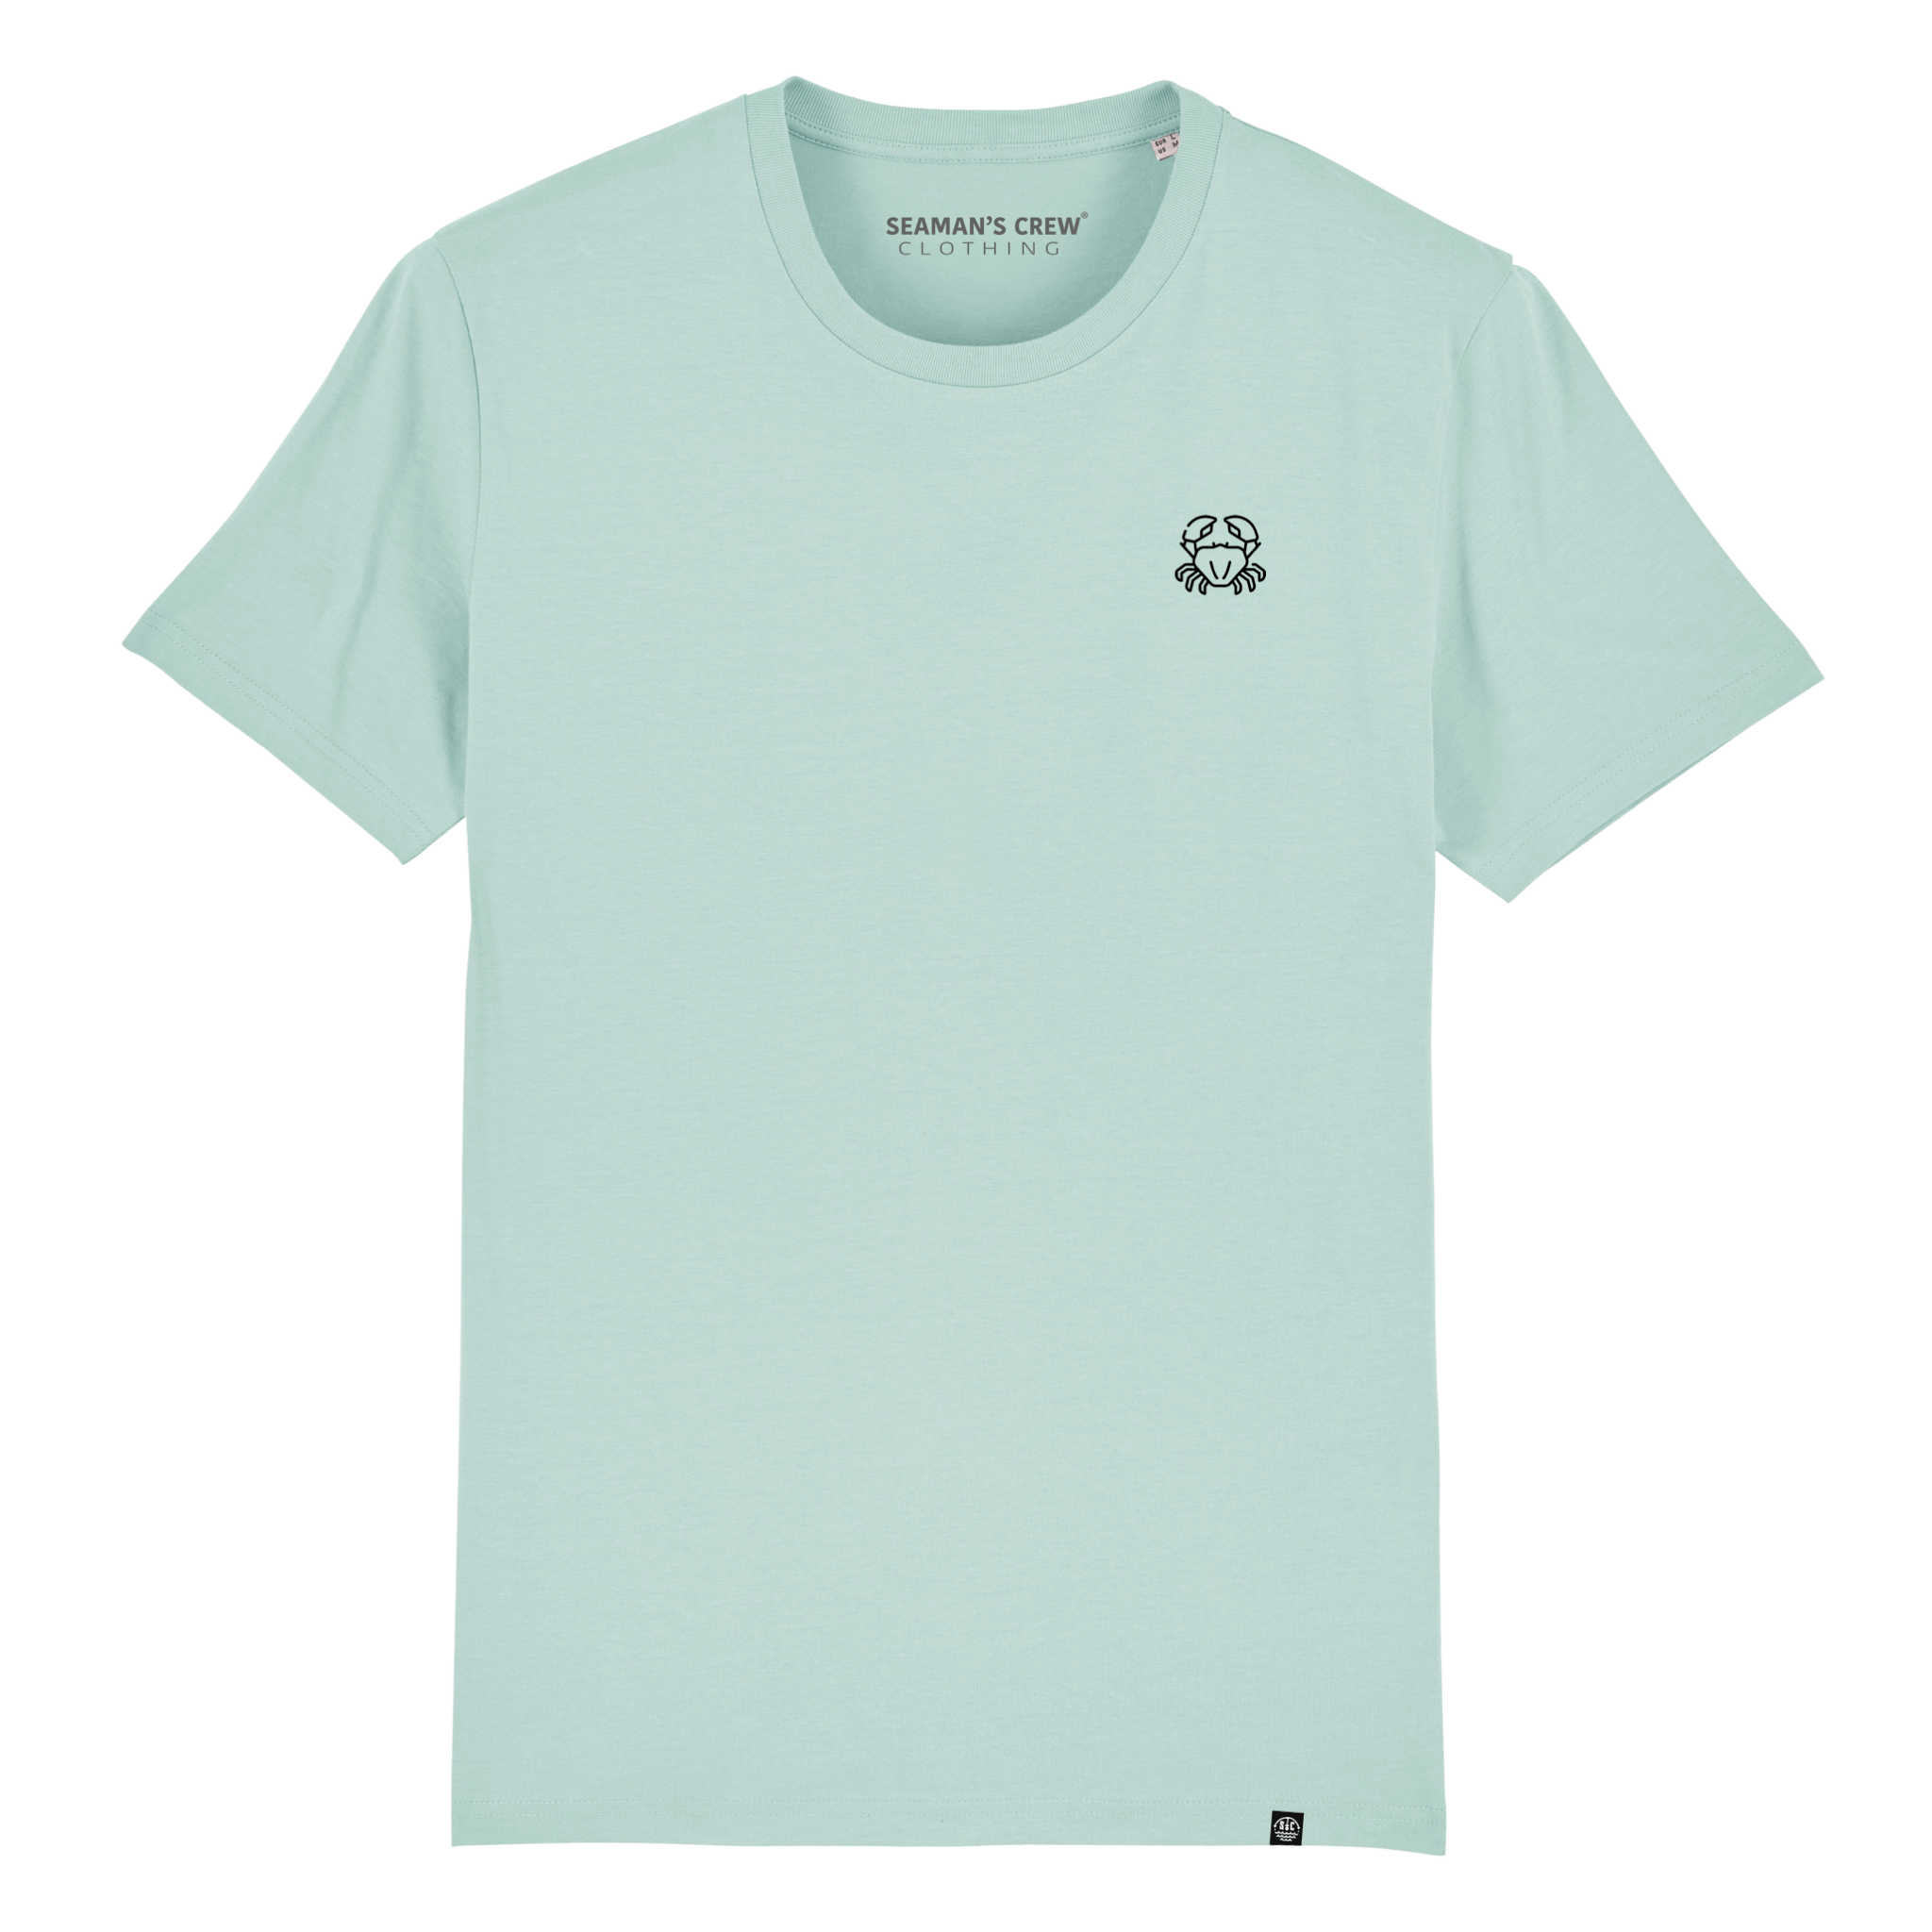 Crab embroidered T-shirt